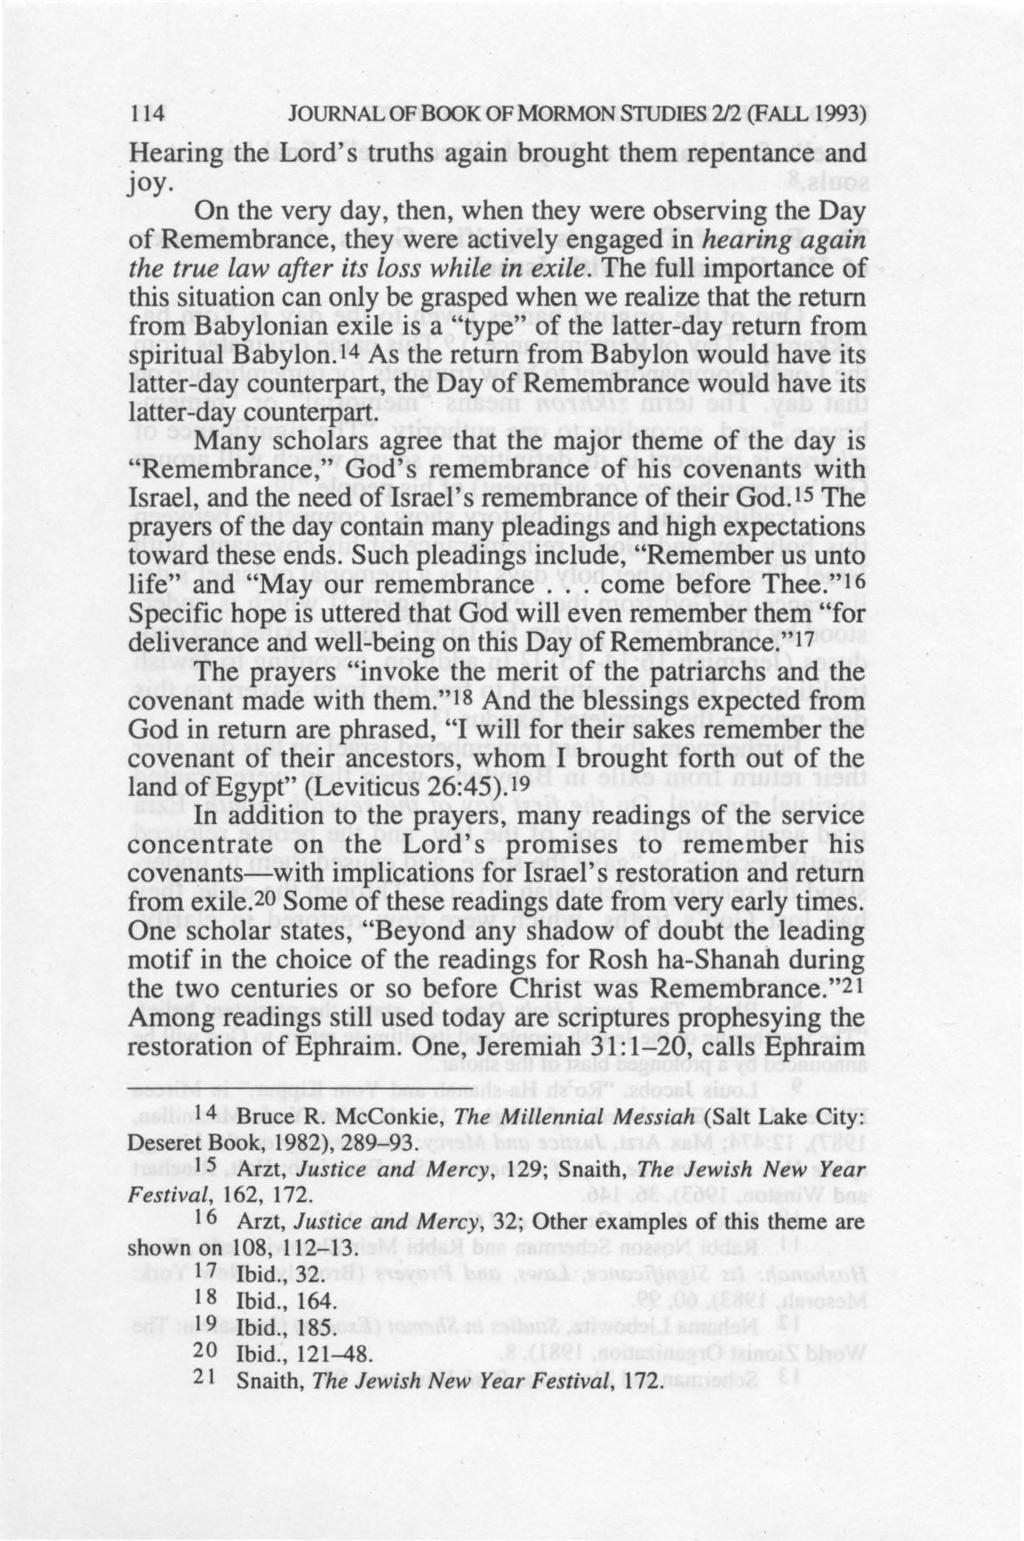 114 JOURNAL OF BOOK OF MORMON STUDIES 2J2 (FALL 1993) Hearing the Lord's truths again brought them repentance and JOY On the very day, then, when they were observing the Day of Remembrance, they were